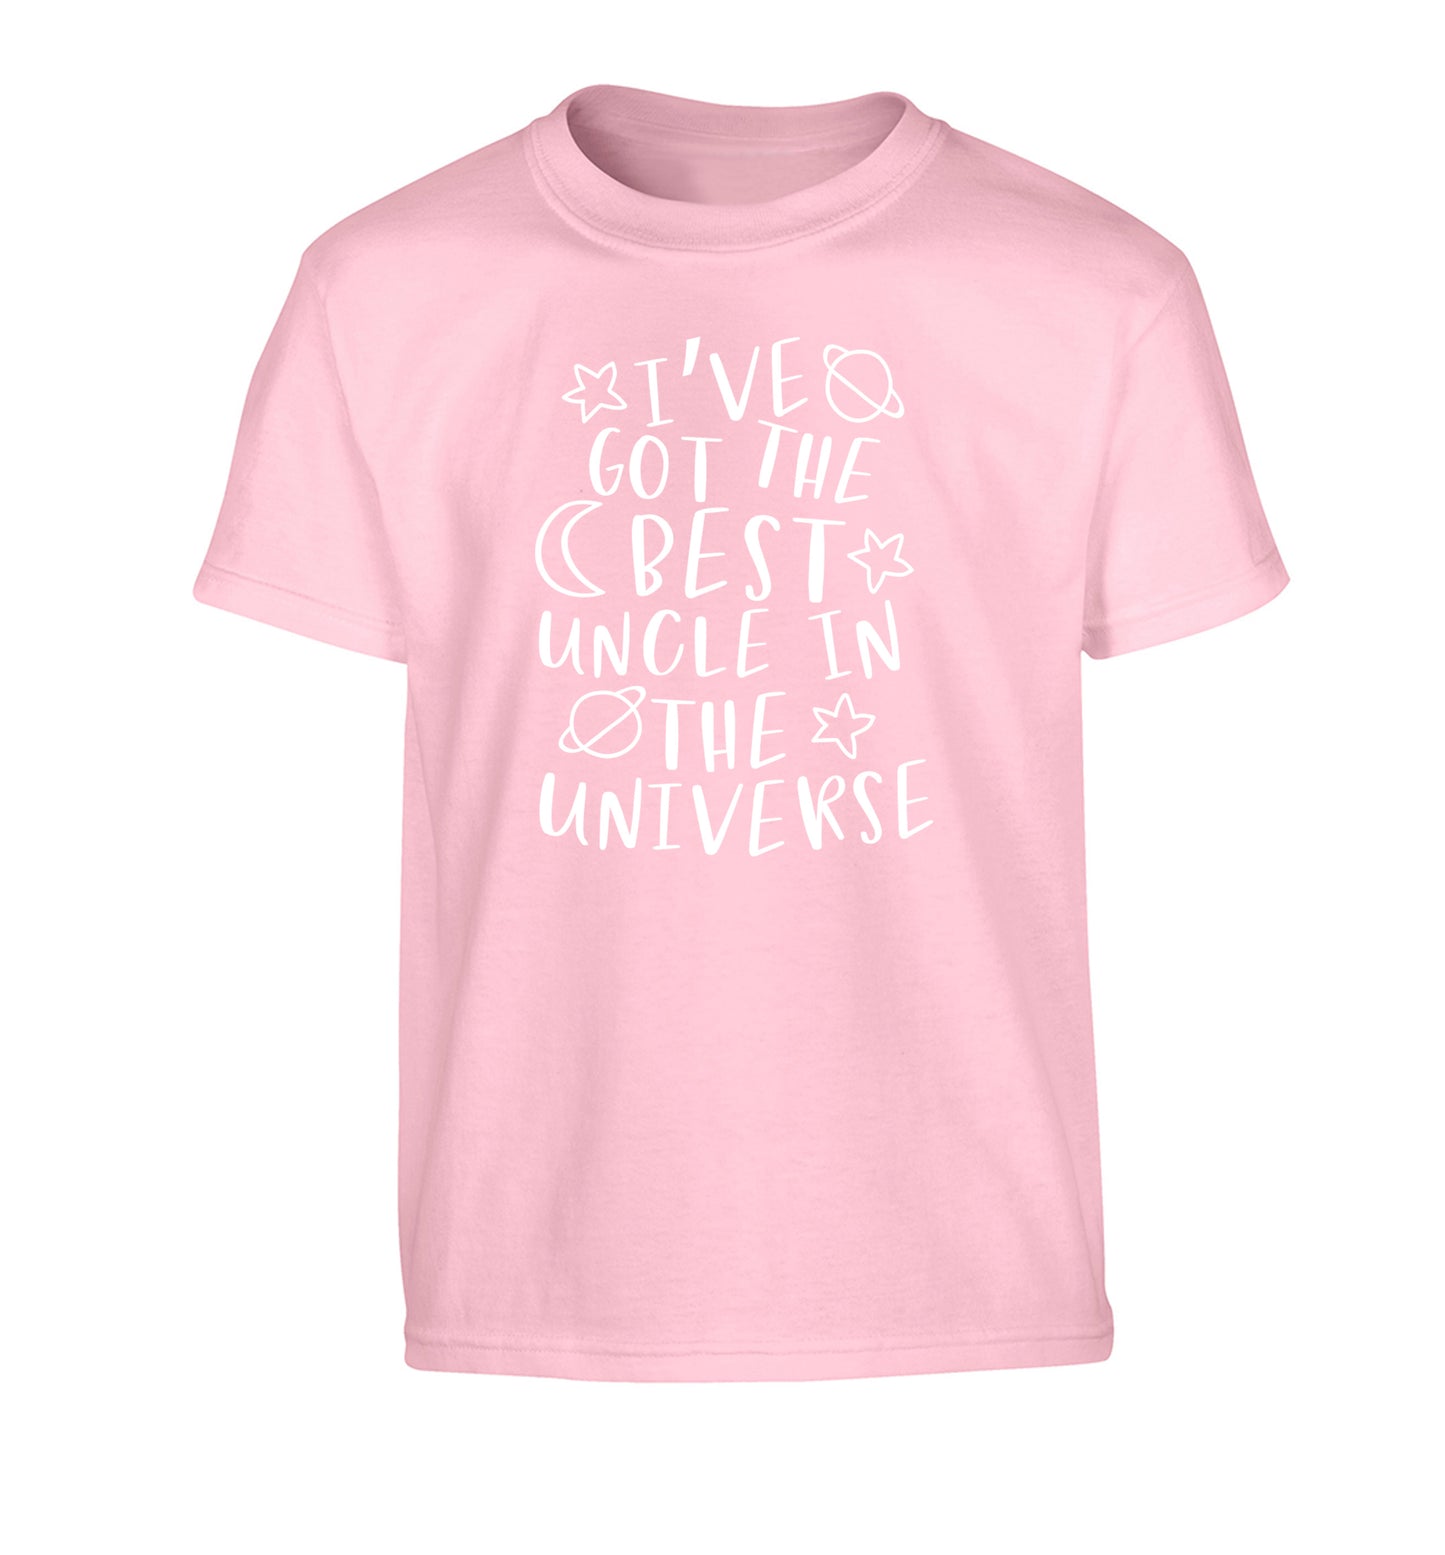 I've got the best uncle in the universe Children's light pink Tshirt 12-13 Years